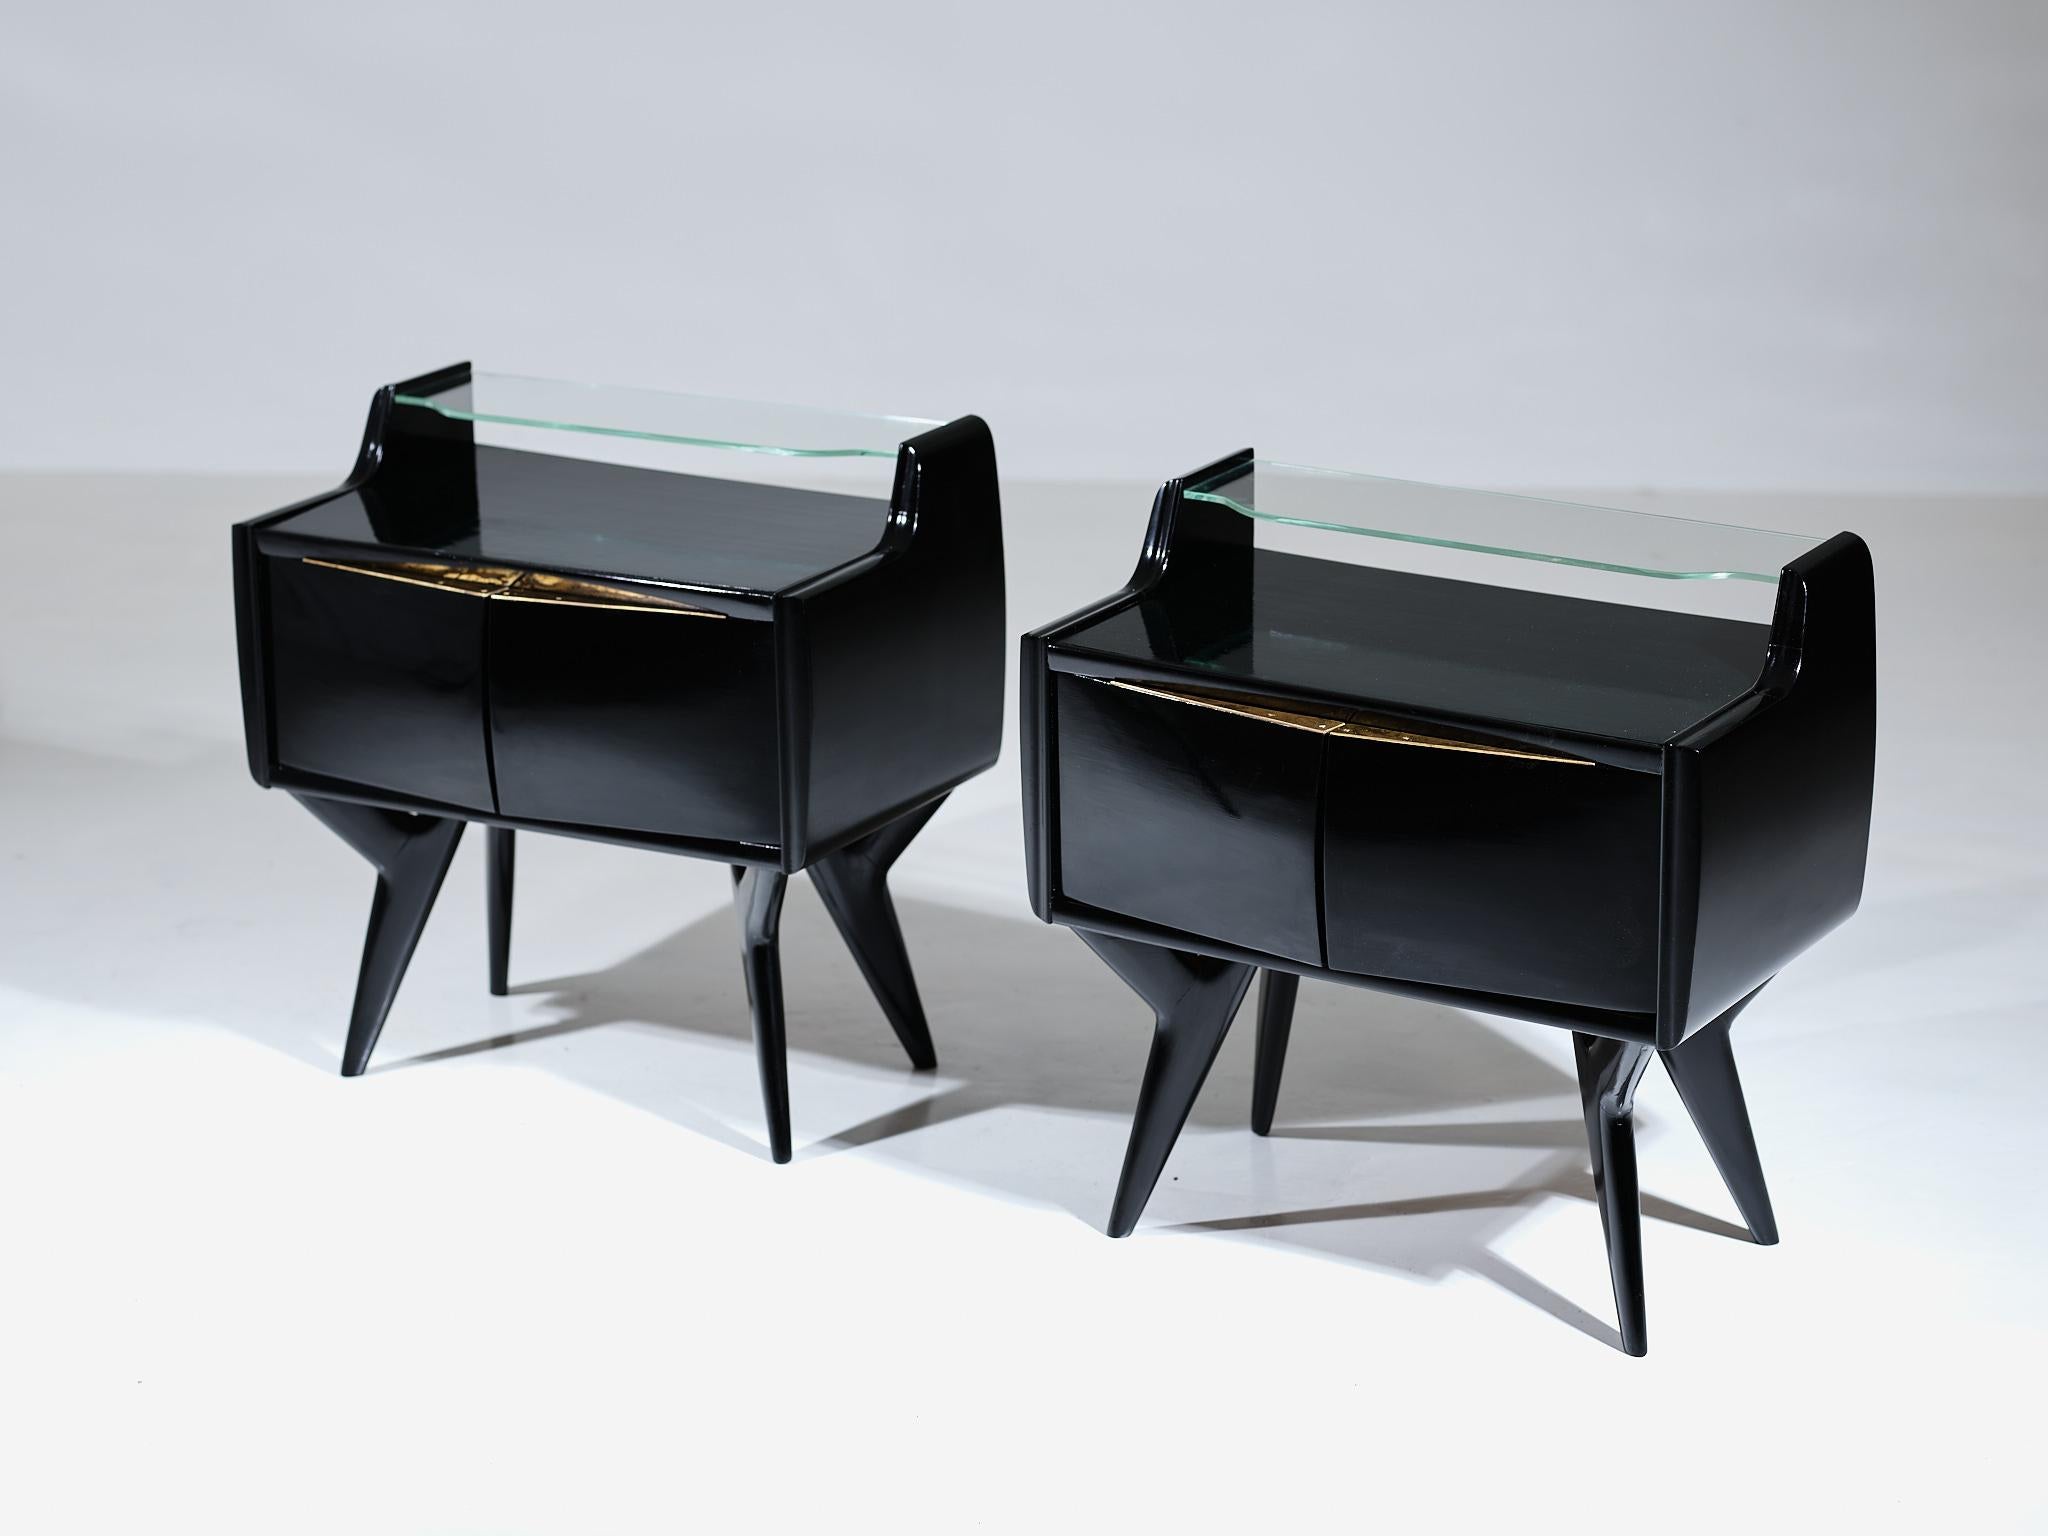 Mid-20th Century Pair of Bedside Tables in Black Lacquered Wood, Brass and Glass, 1950s